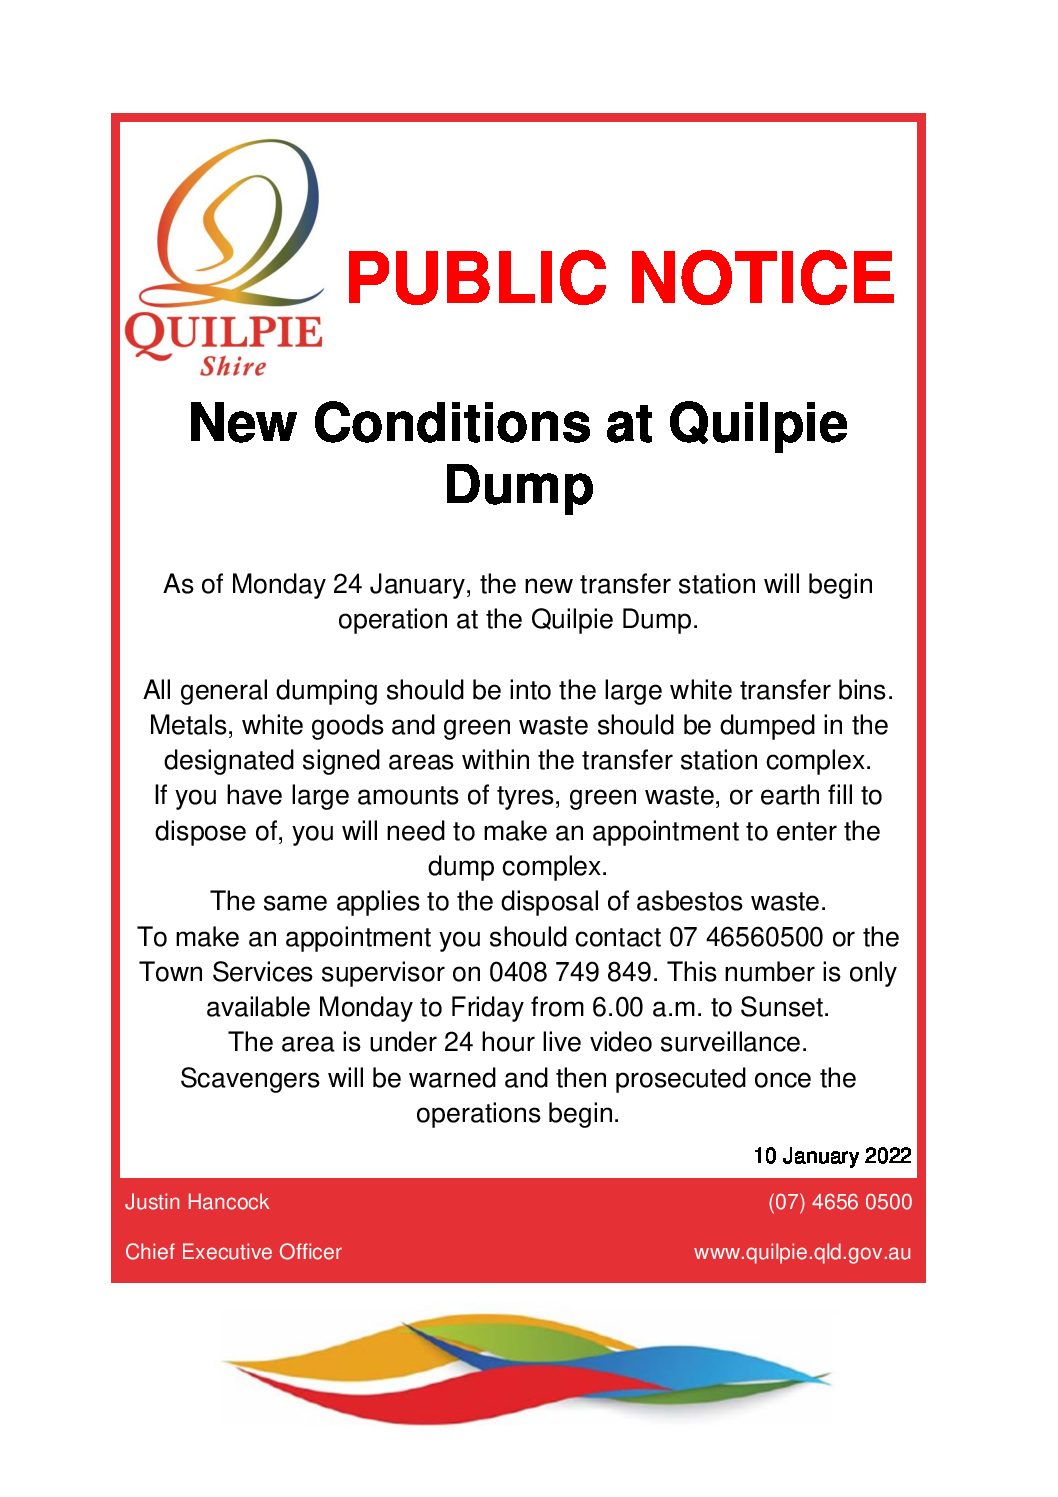 New Rules at Quilpie Dump